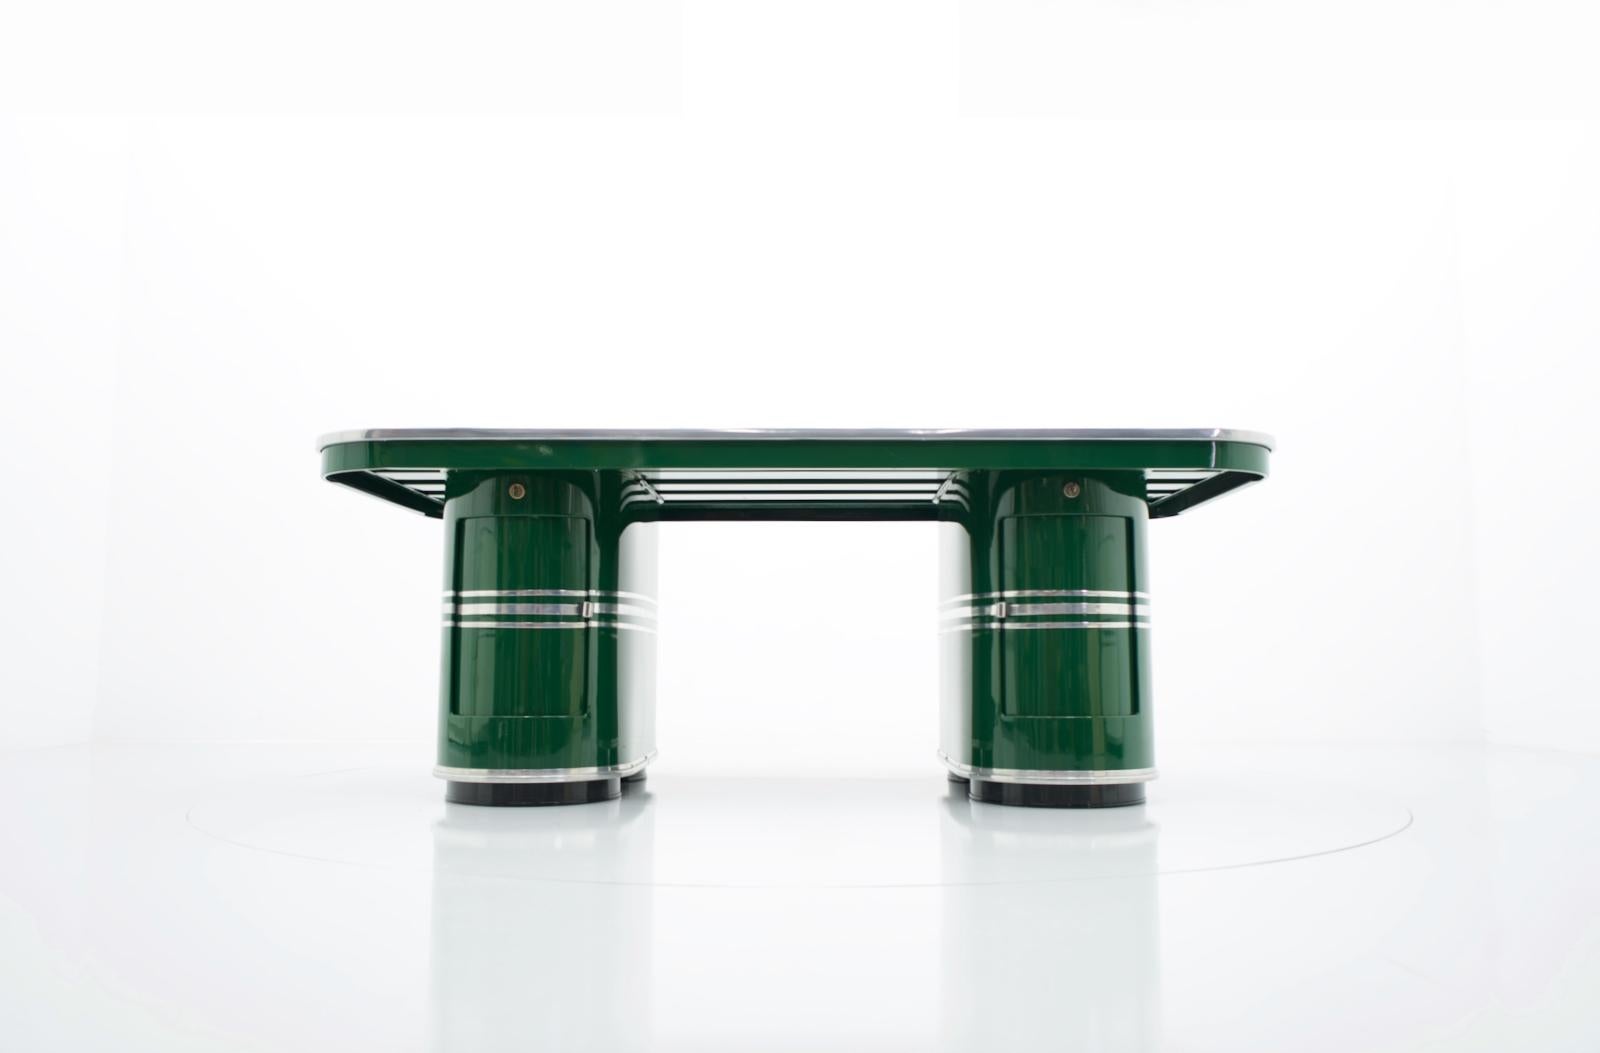 Mauser Rundform 'Berlin' Writing Desk in British Racing Green, Germany, 1950 For Sale 2